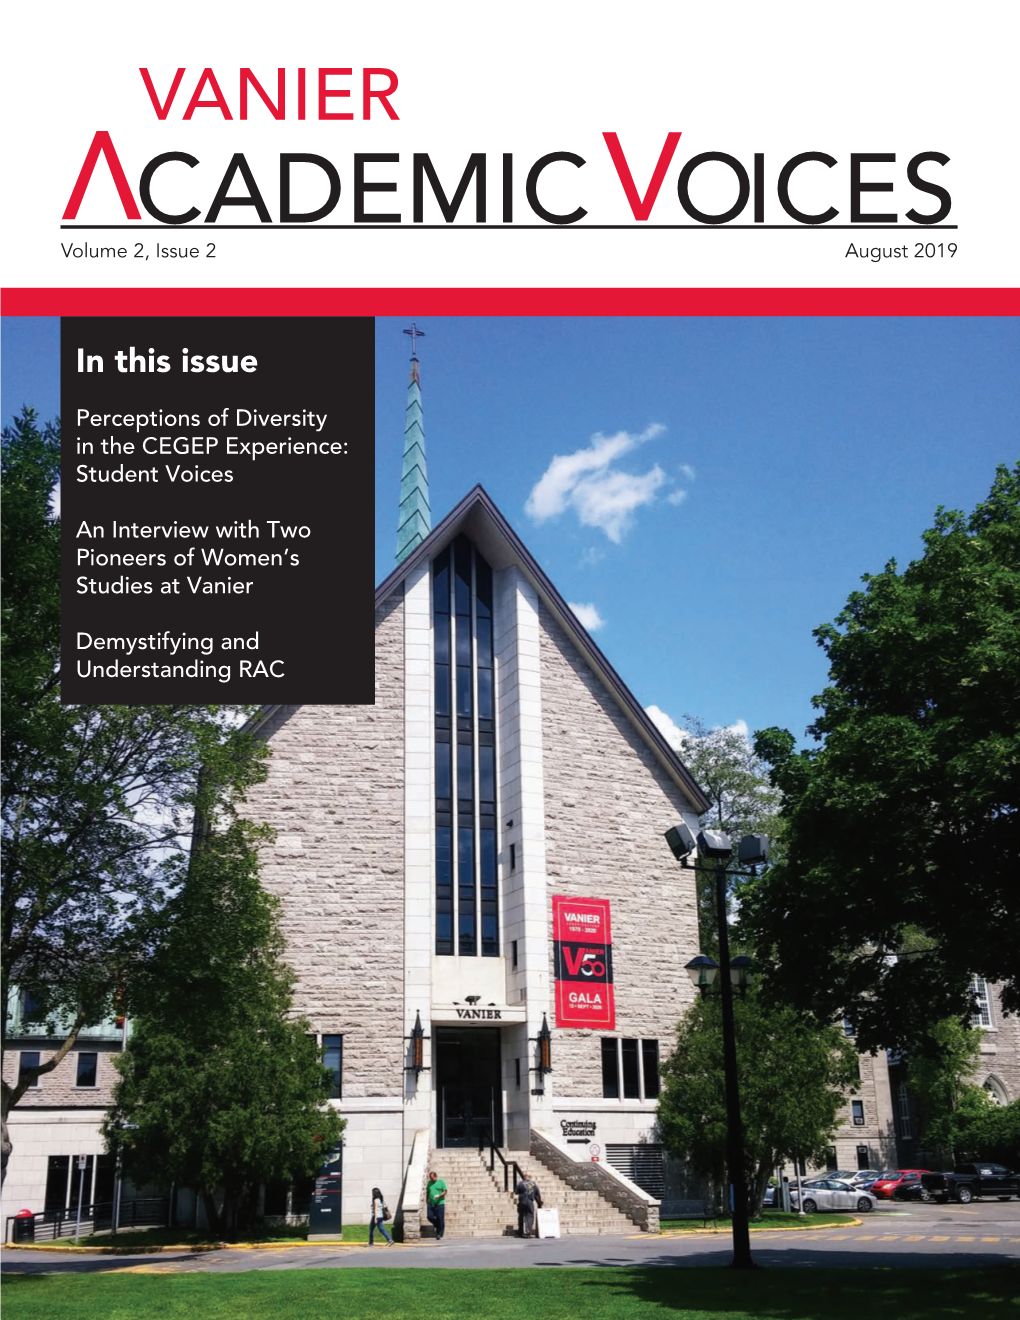 CADEMIC OICES Volume 2, Issue 2 V August 2019